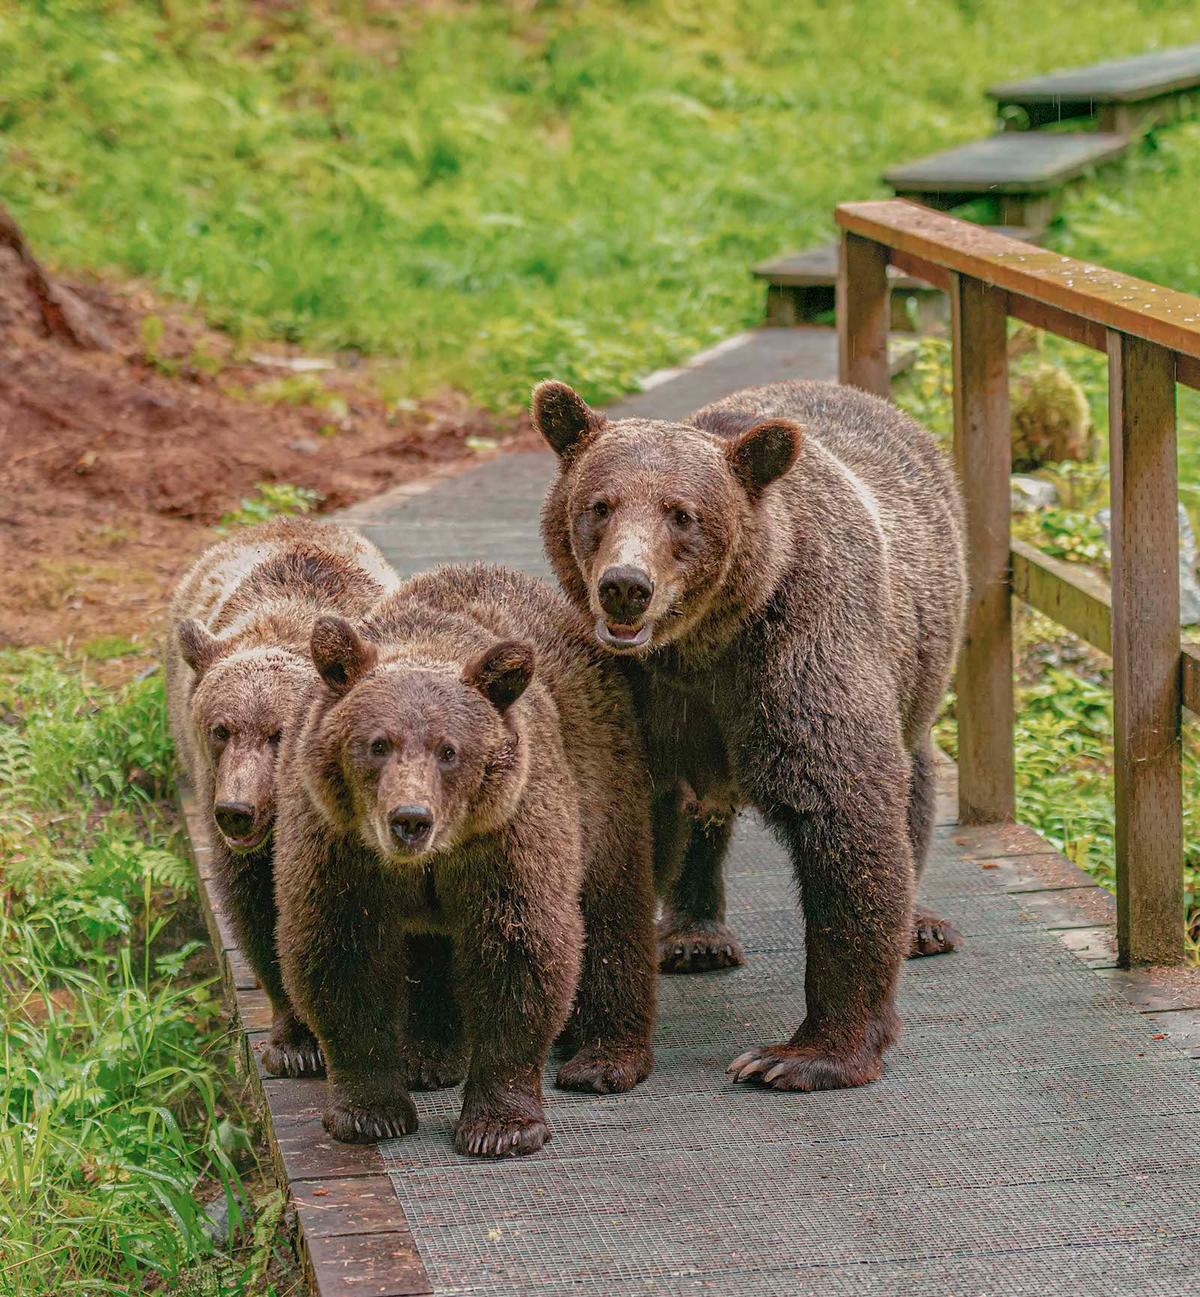 The bears are free to walk all over the Anan Bear & Wildlife Observatory viewing platform. (Caters News)